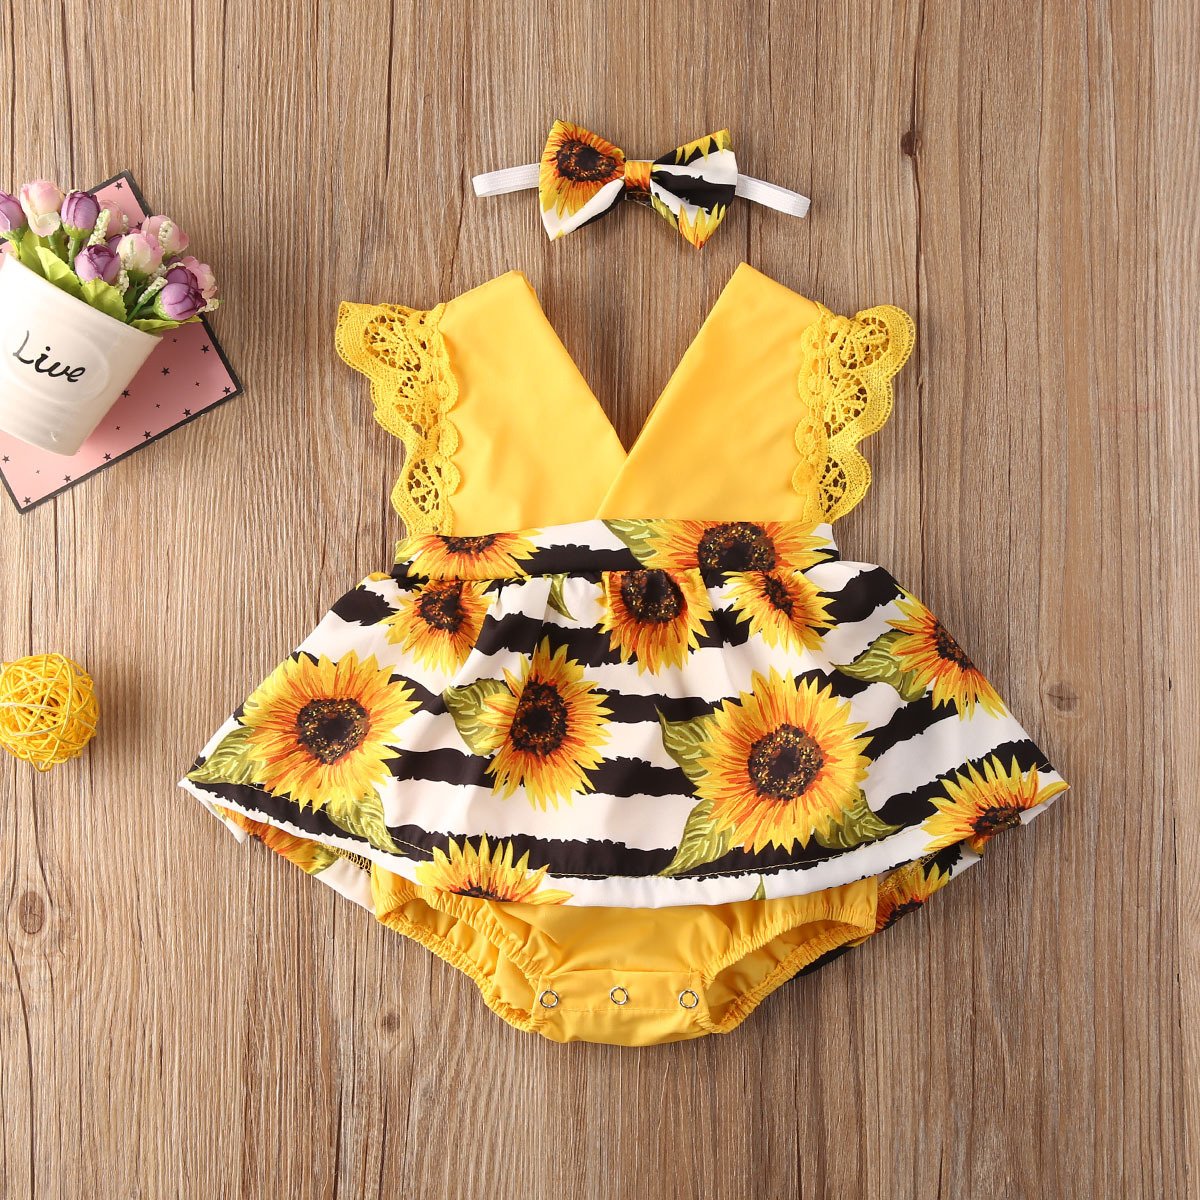 Baby bag fart clothing triangle romper 0-3 years old baby clothing spring and summer girls sun flower one-piece SaraMart UK Shopping